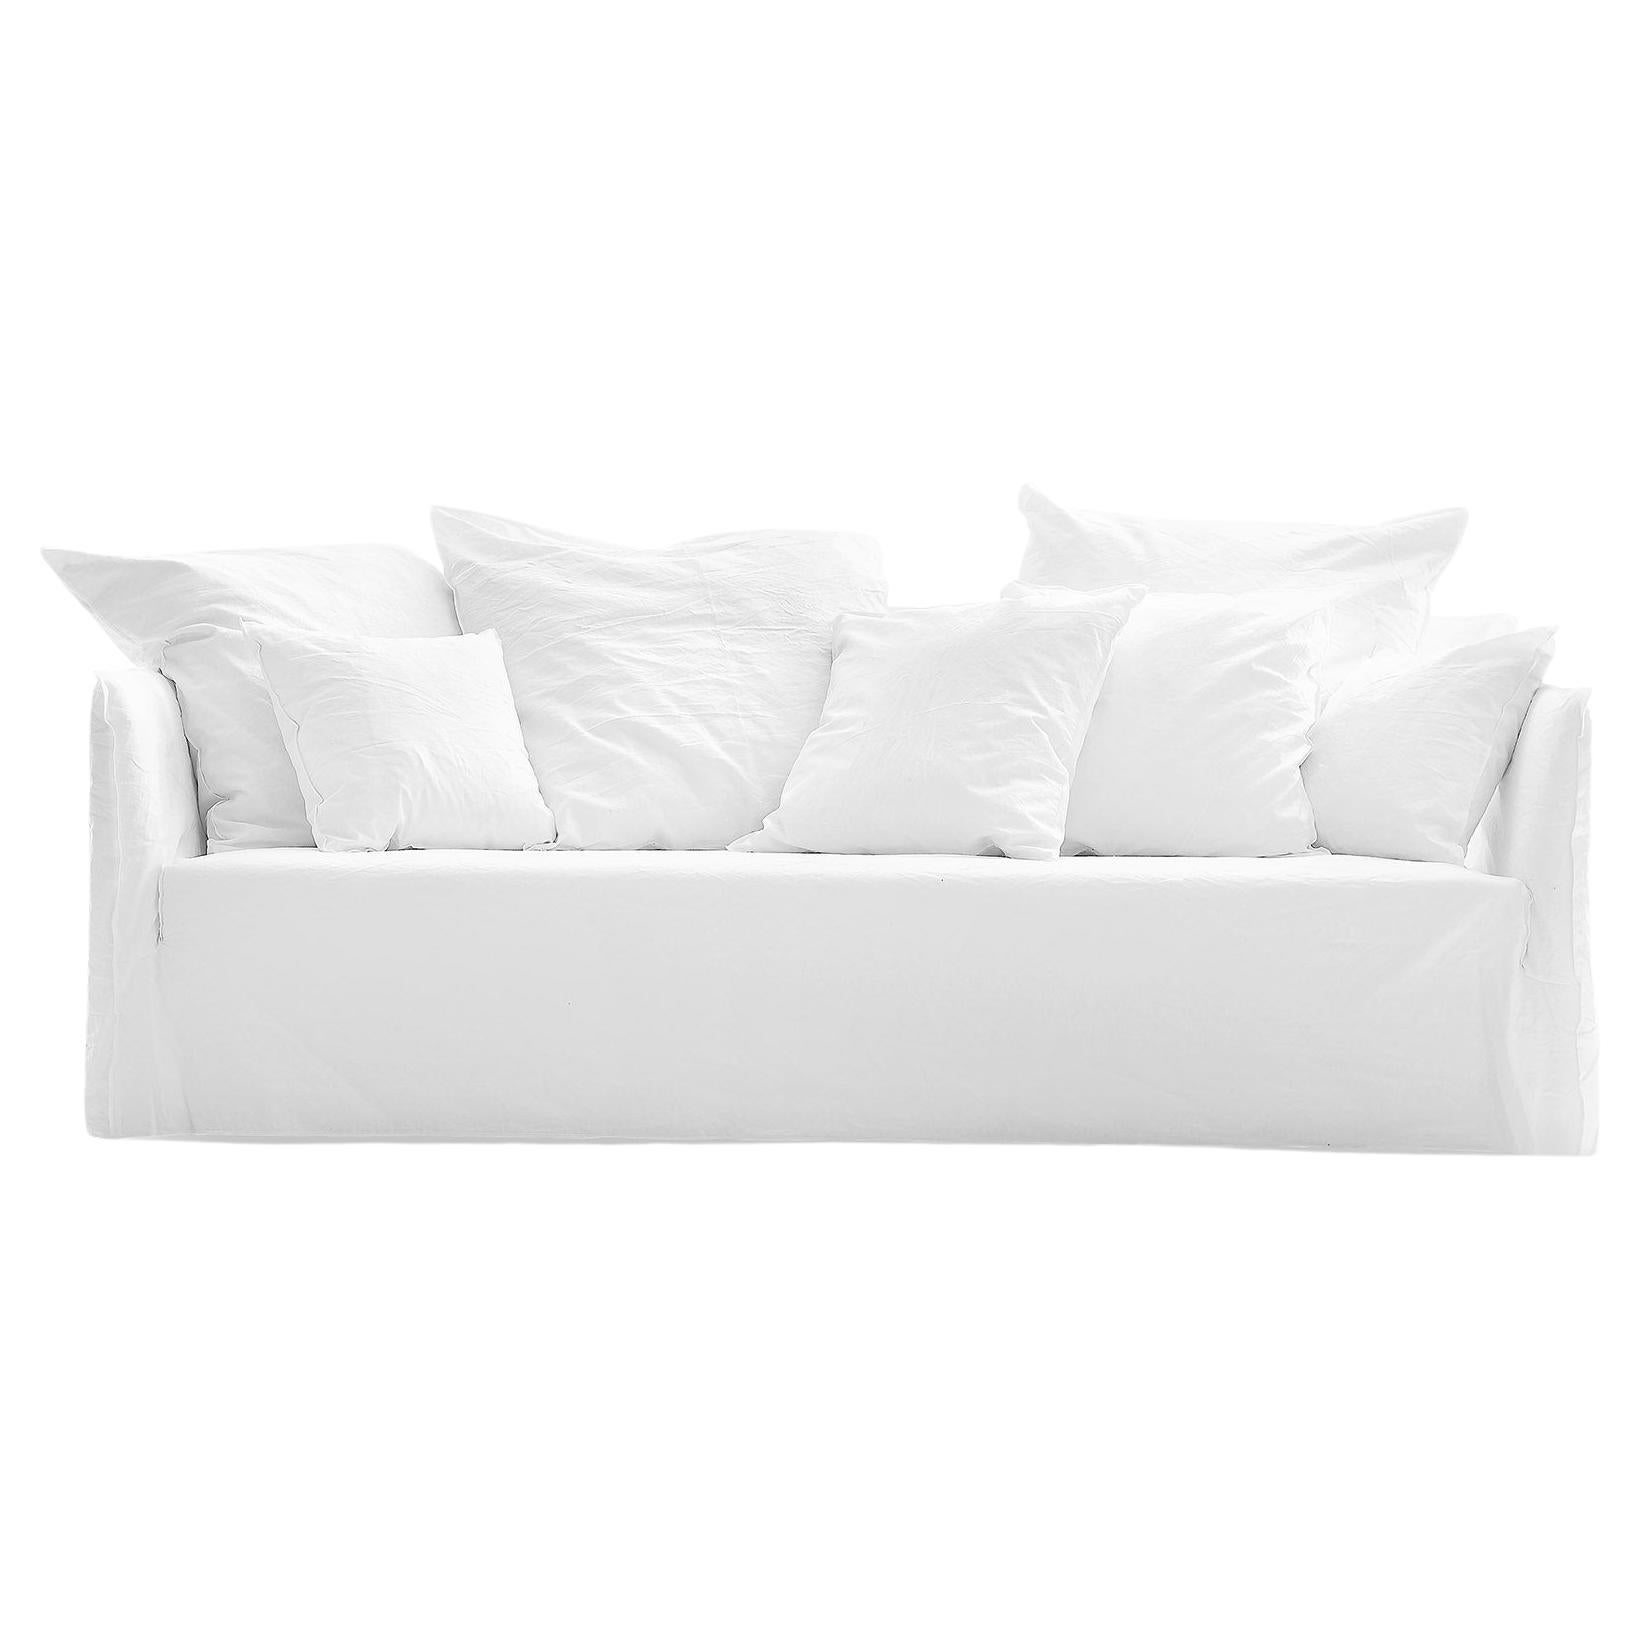 Gervasoni Ghost 112 Sofa in White Linen Upholstery by Paola Navone For Sale